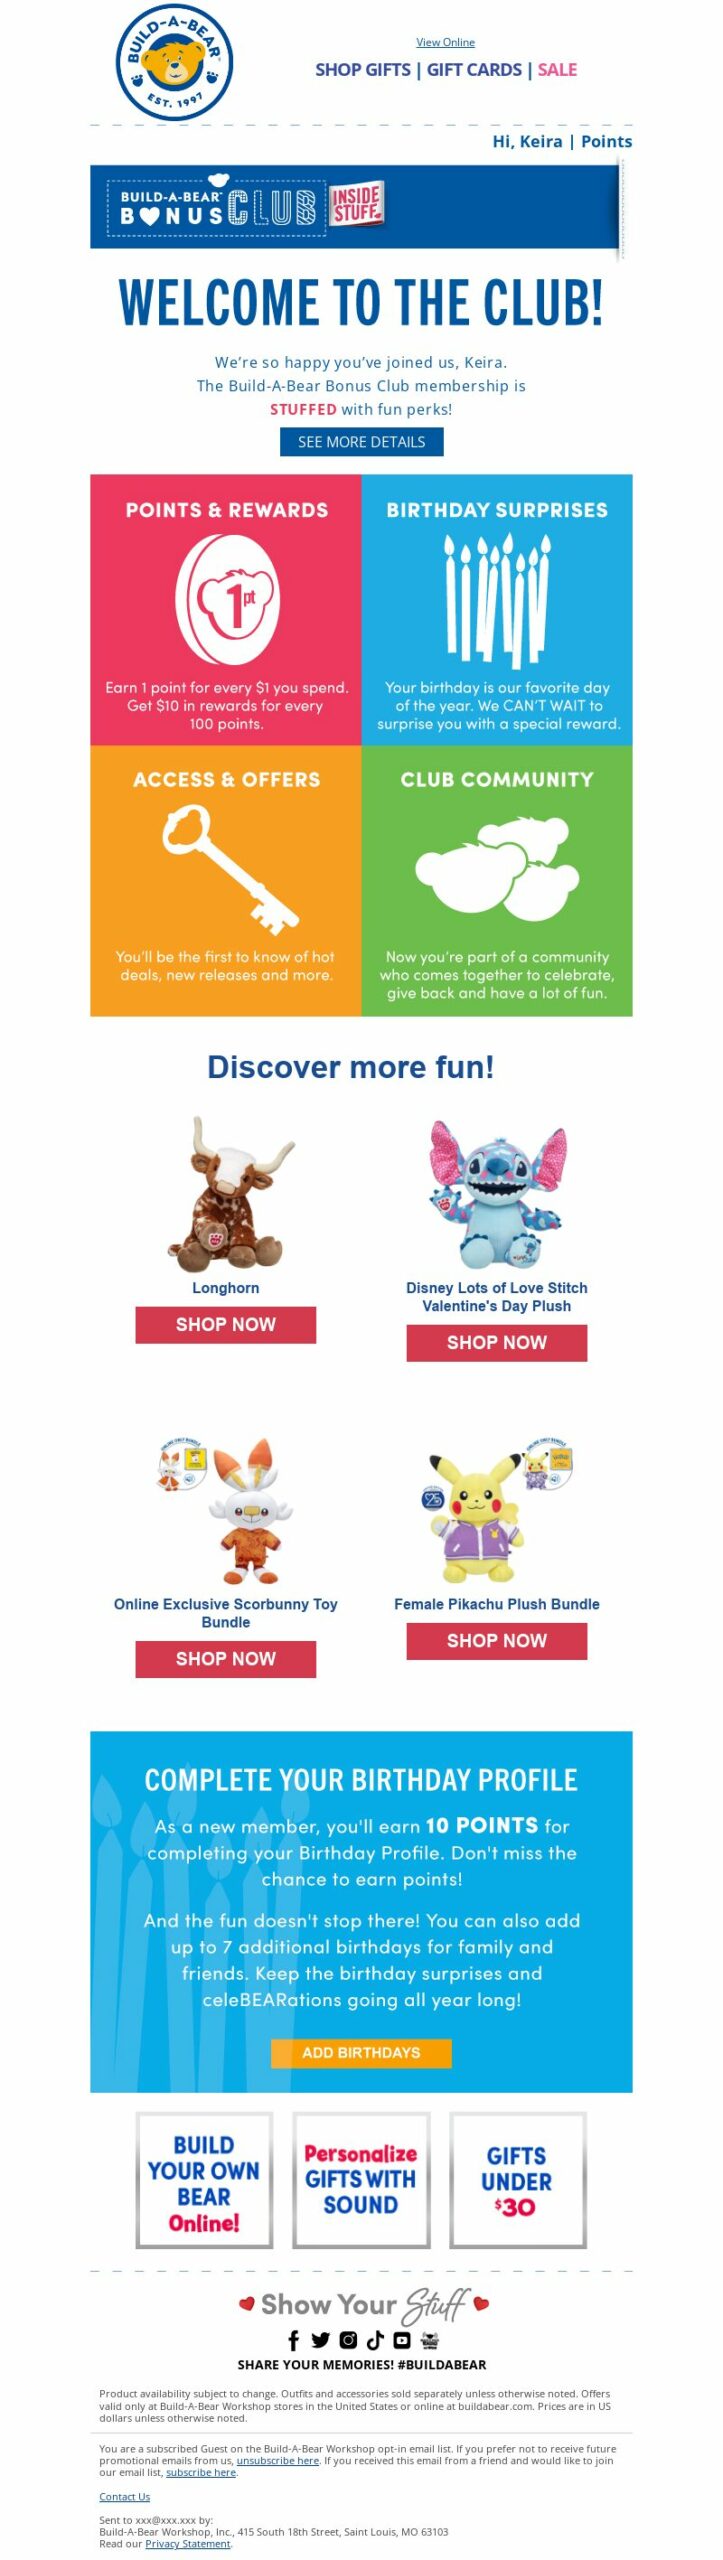 Build-A-Bear Workshop, Welcome to the Bonus Club welcome series email.